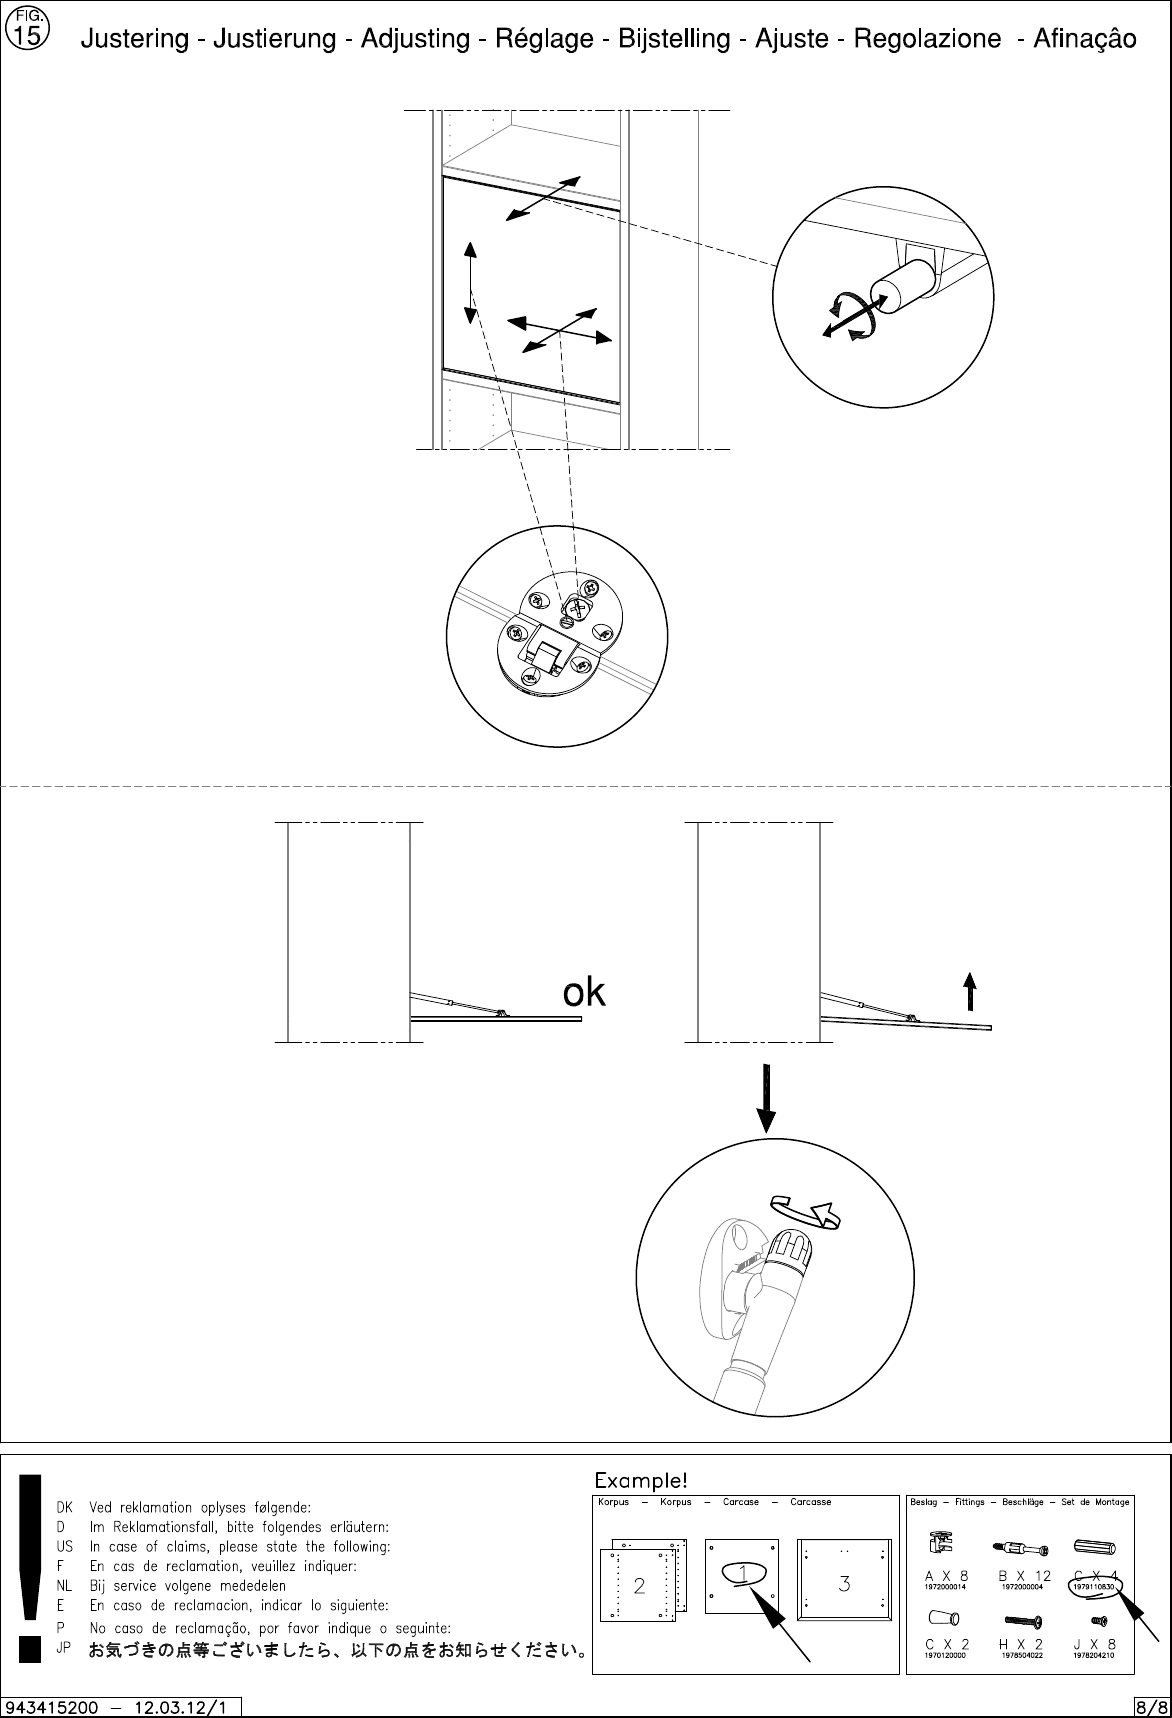 Page 8 of 8 - Boconcept Boconcept--5200-Assembly-Instruction B:\DK_PTA_Share\Inventor Ation\341 Lecco\Lecco 5200\Assembly Instruction\943415200_v1_10